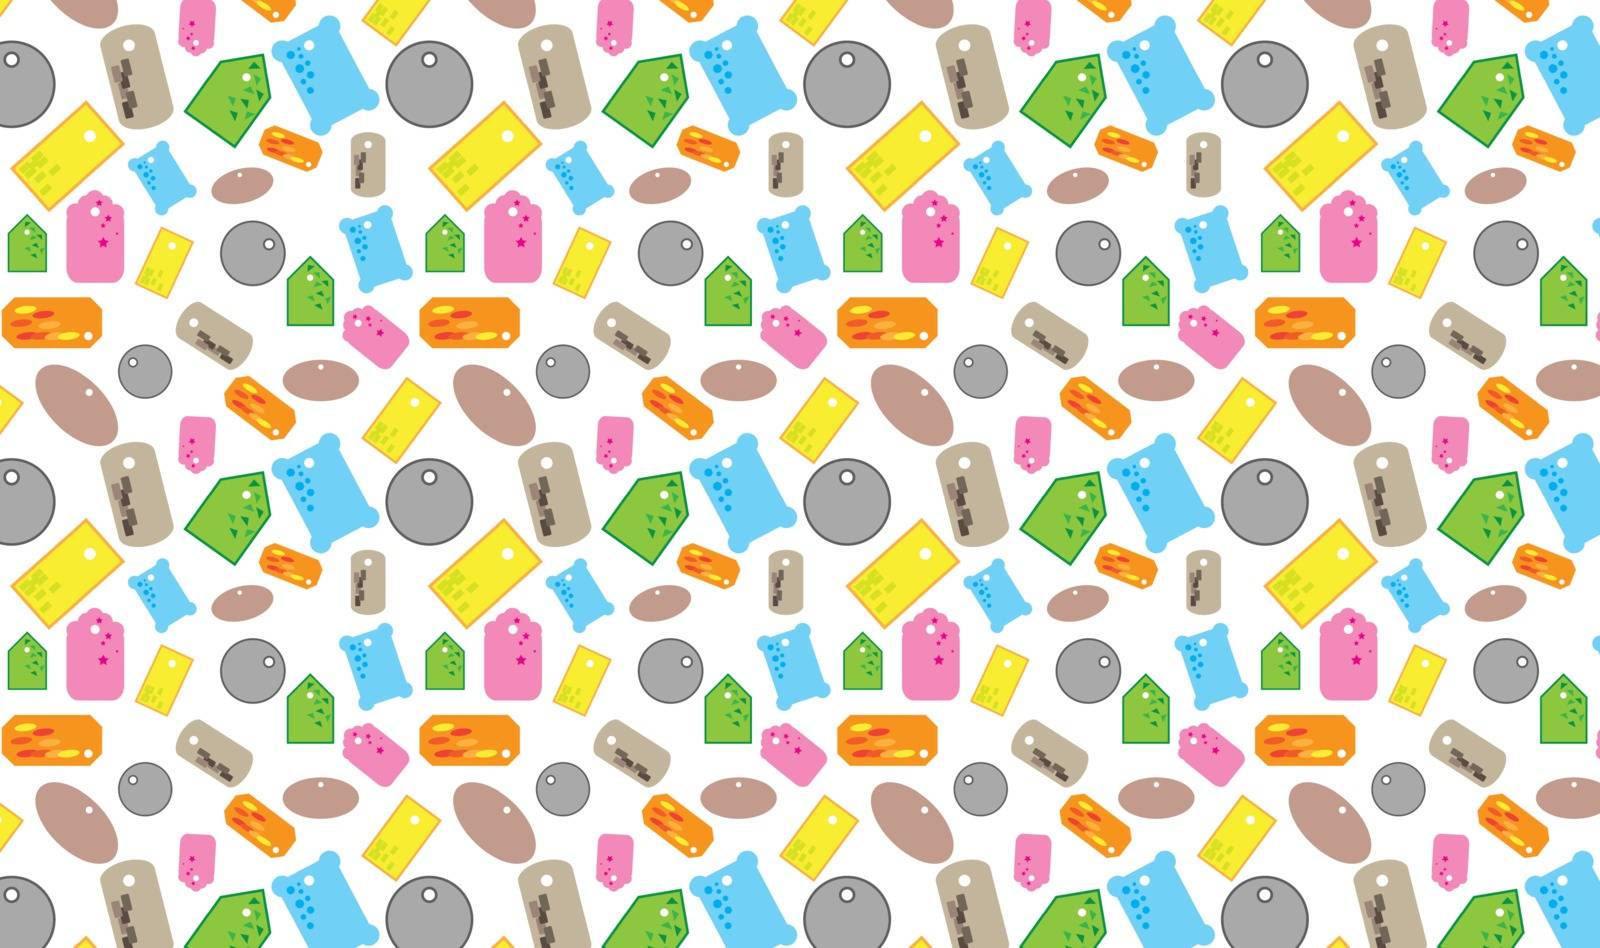 Price tags seamless pattern by hamik